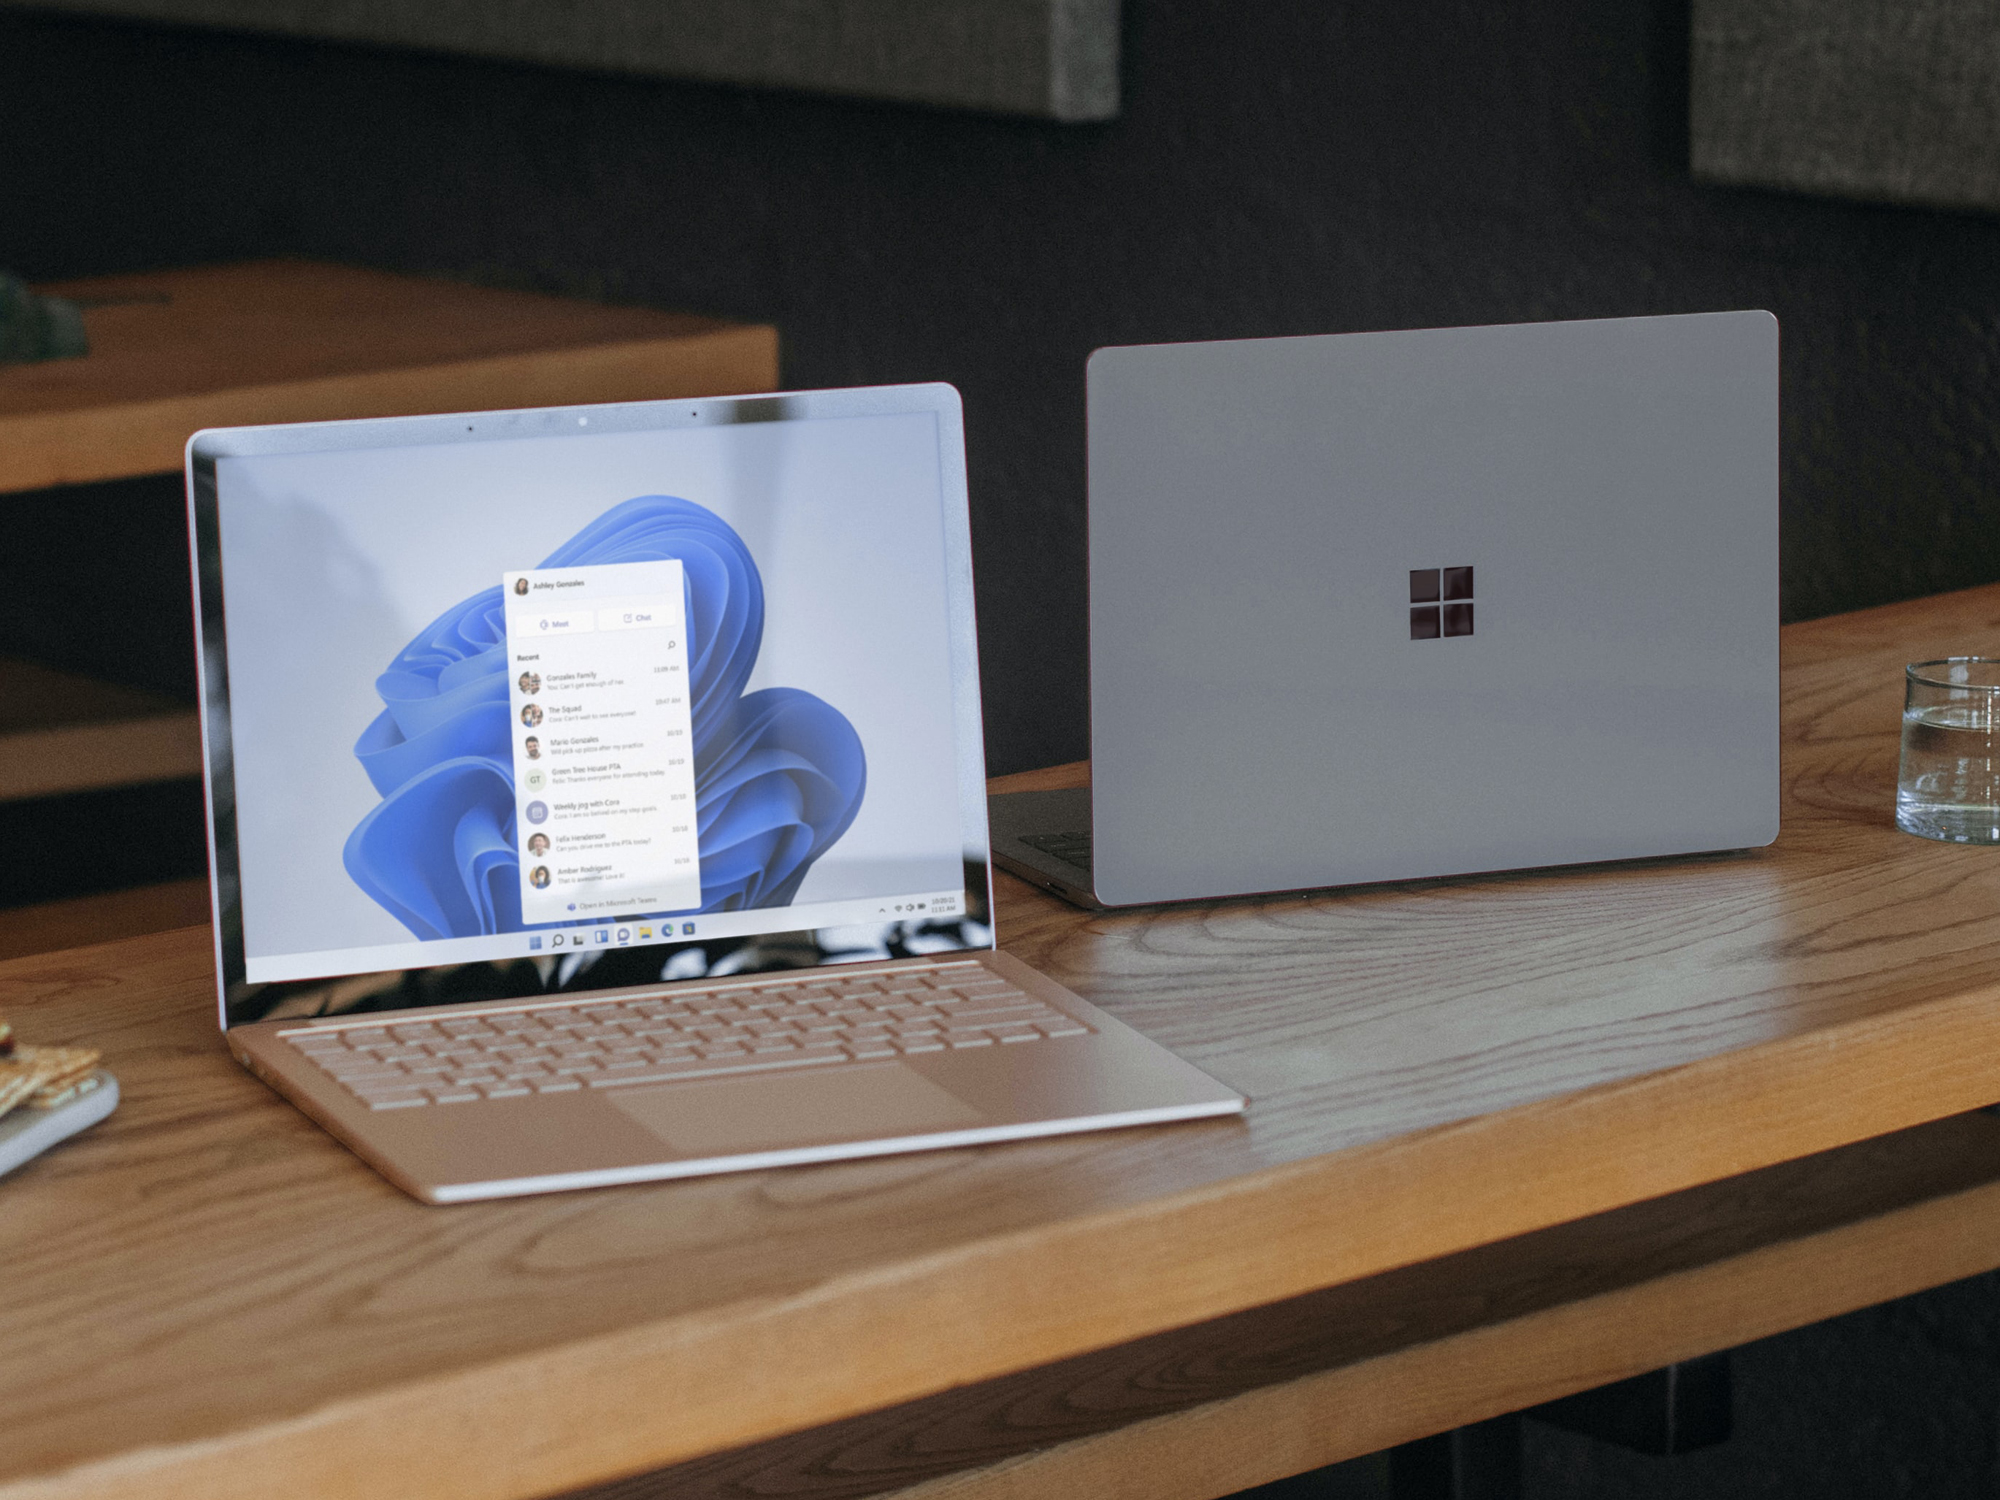 Make your life easier by syncing up all your Windows 11 devices